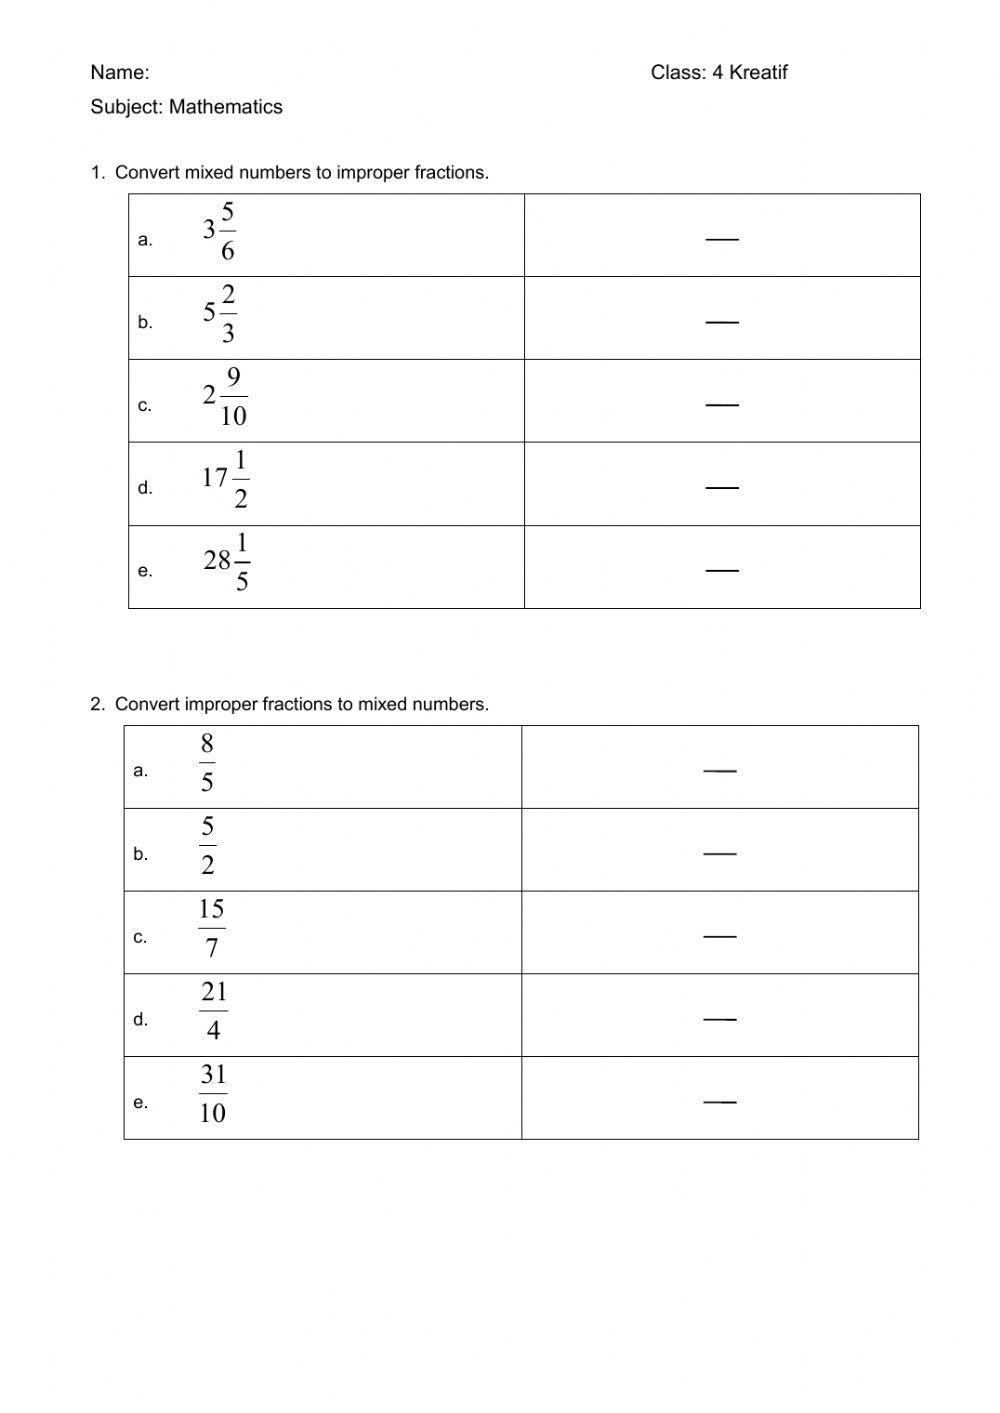 Converting mixed numbers into fractions and vice versa